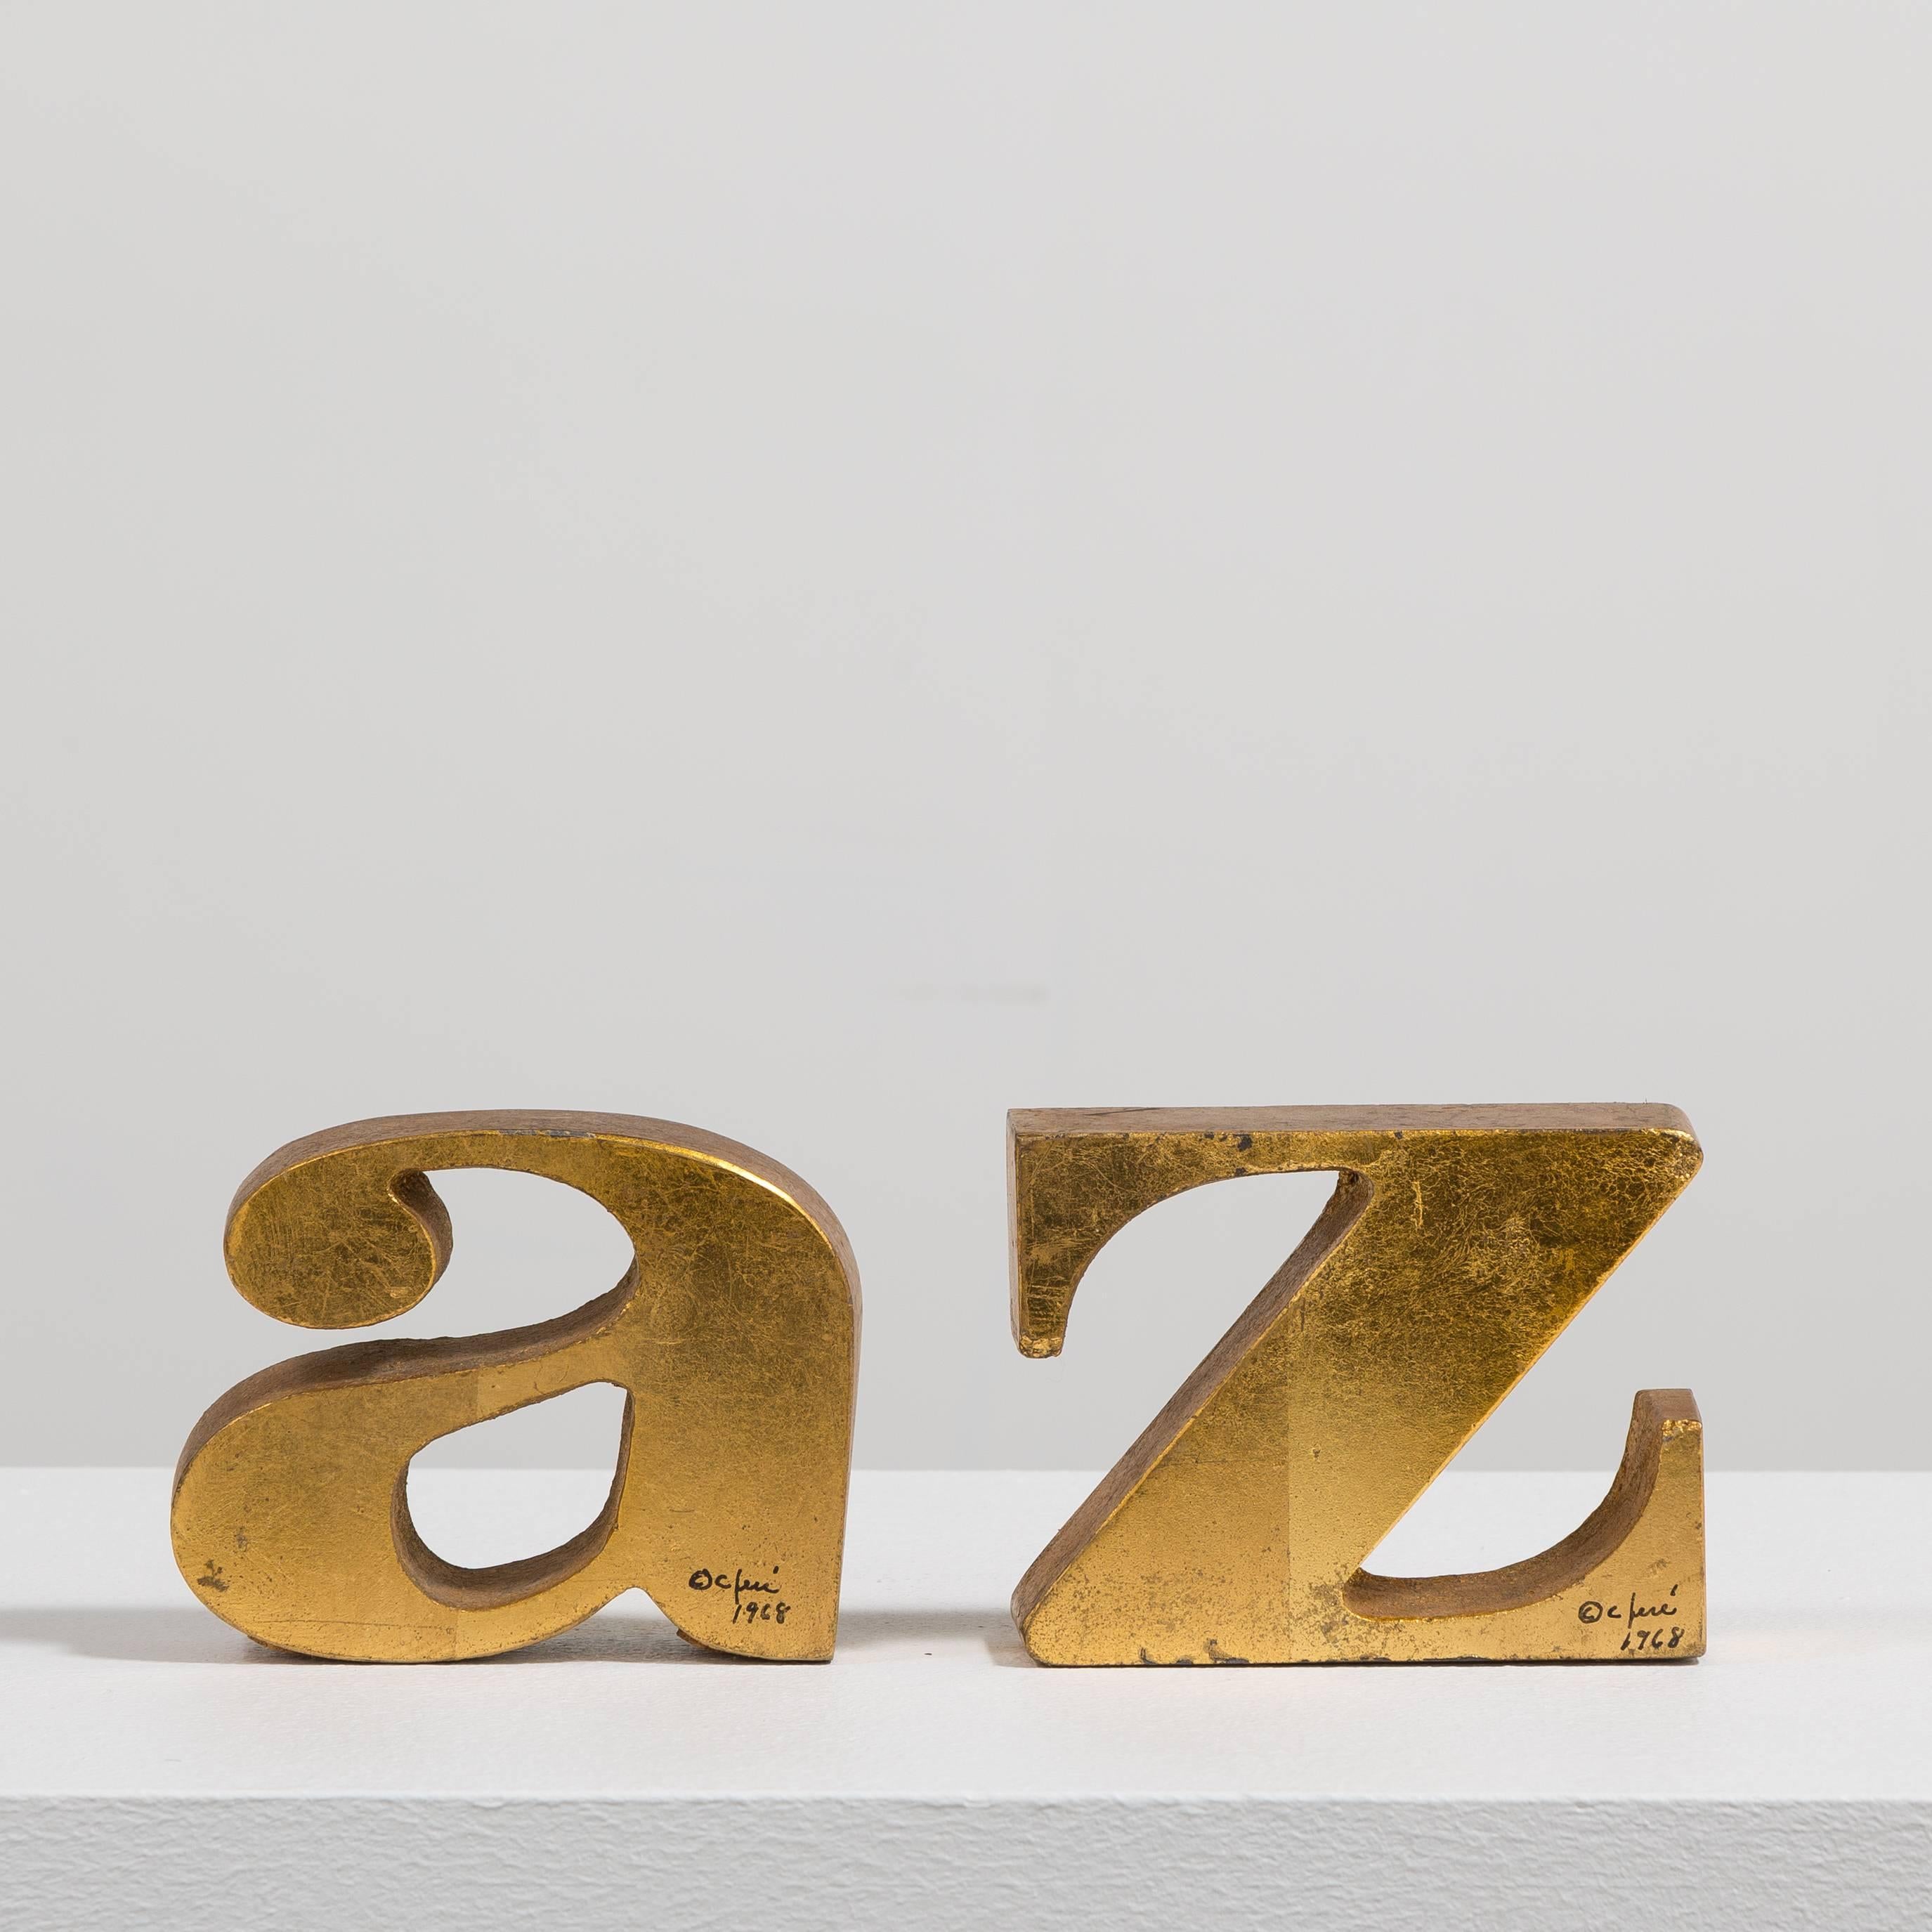 A rare pair of A-Z gilded bookends by Curtis Jere signed and dated 1968 

Curtis Jeré is the collaboration of two metal sculptors Jerry Fels and Curtis Freiler who founded the company Artisan House in the USA in 1963. These two brother in laws